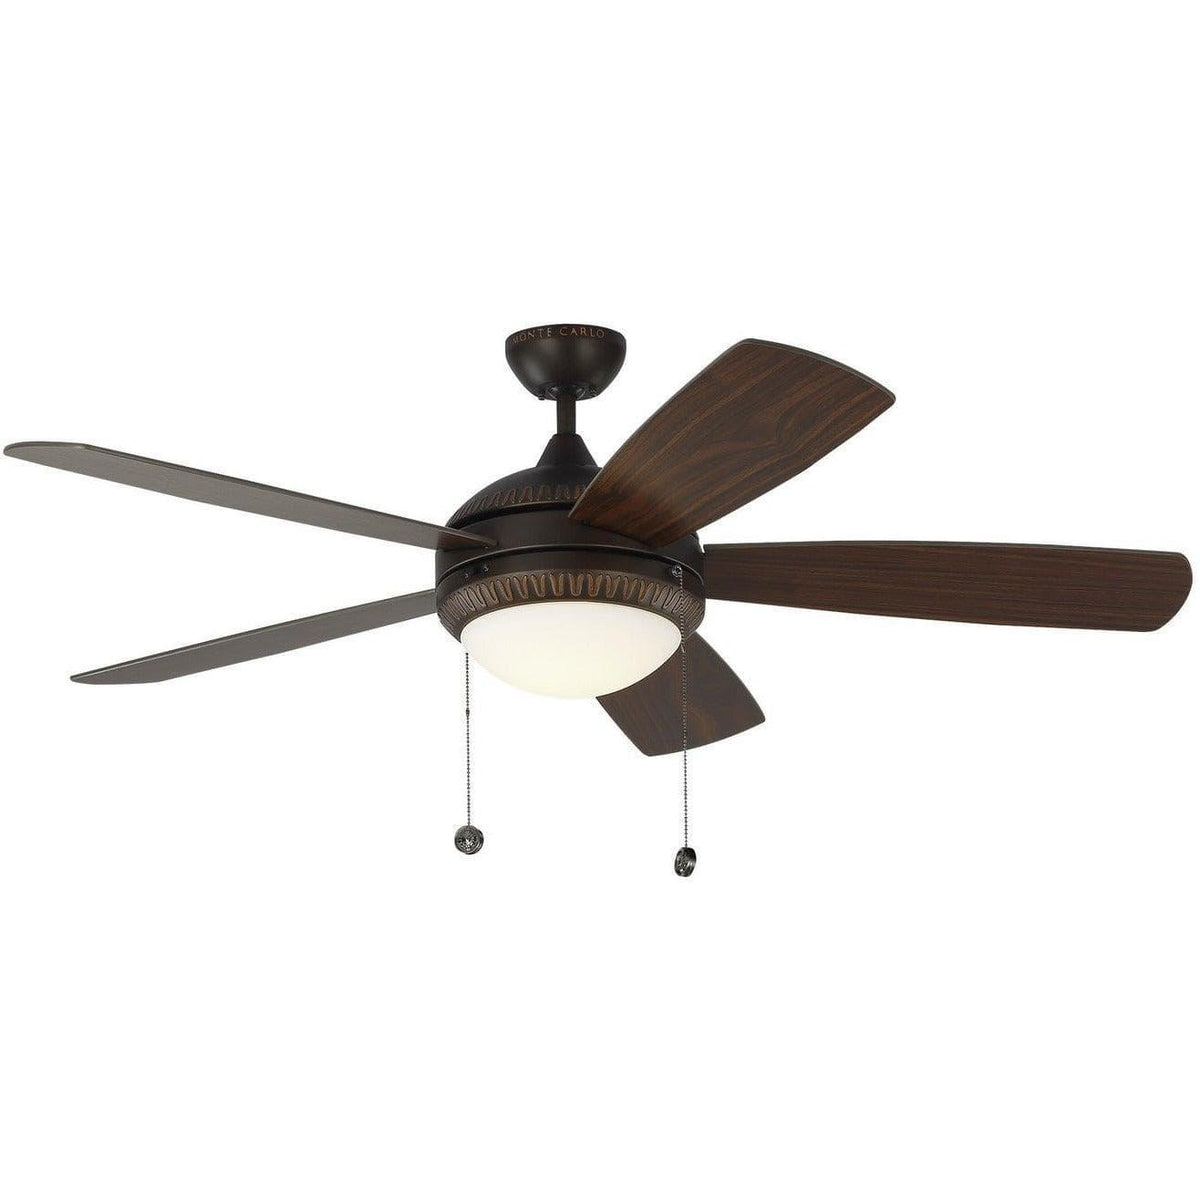 Visual Comfort Fan Collection - Discus Ornate 52" Ceiling Fan - 5DIO52RBD | Montreal Lighting & Hardware